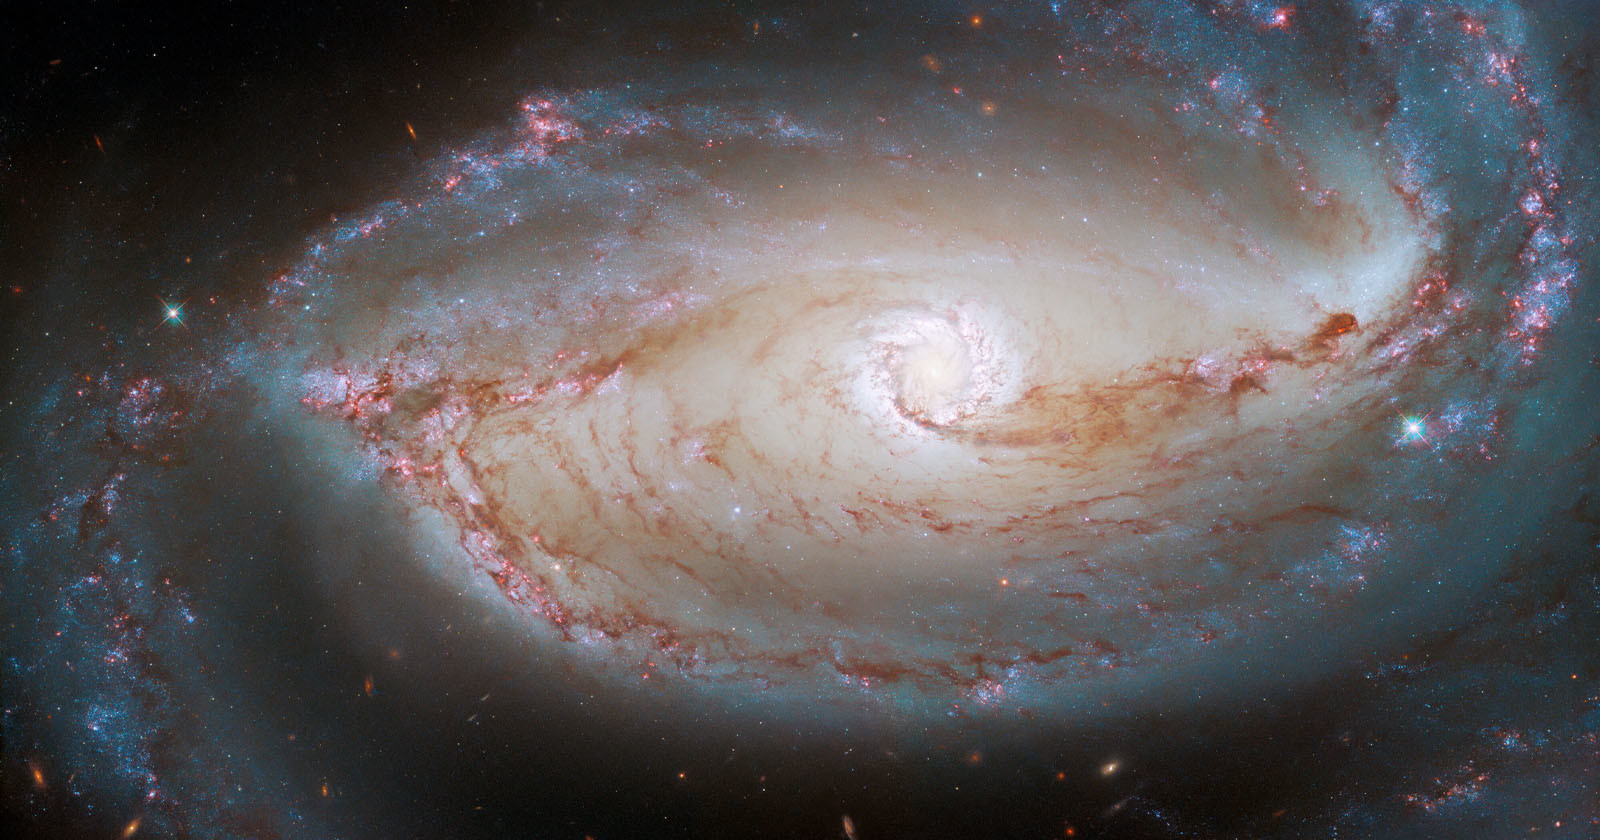 Hubble Uses Two Cameras to Take a Stunningly Detailed Galaxy Photo